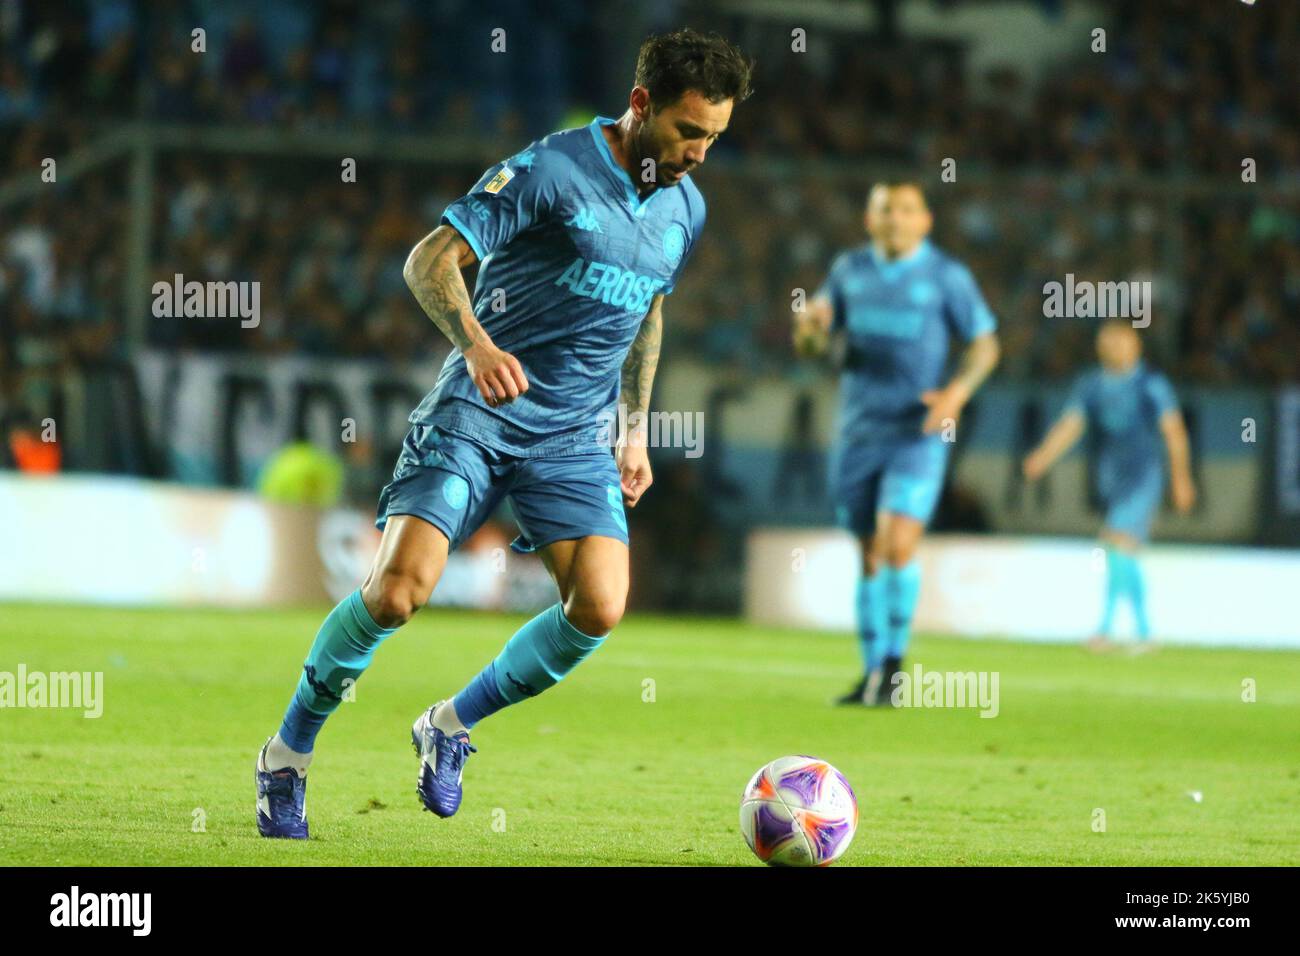 BUENOS AIRES, 10.10.2022: Racing and Atlético Tucuman play the closing match of the 24th round of the Argentine Professional Football League Stock Photo